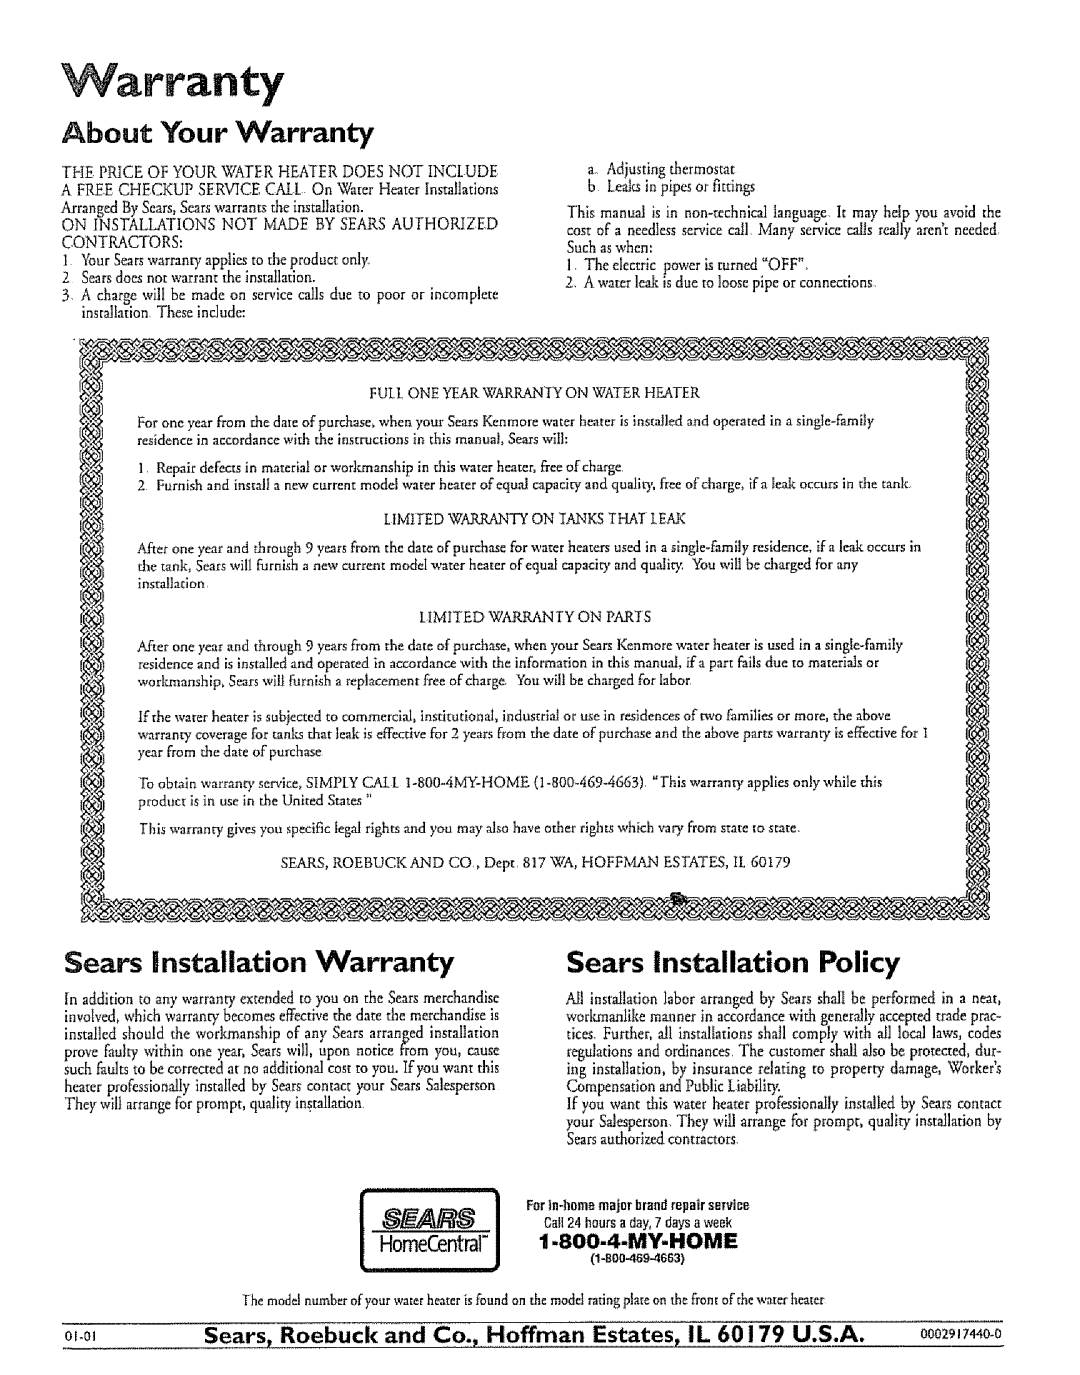 Kenmore 327266_J 40 GAI SHORT About Your Warranty, Sears Installation Policy, HomeCentral, ol.0, 000=9,7440-0 